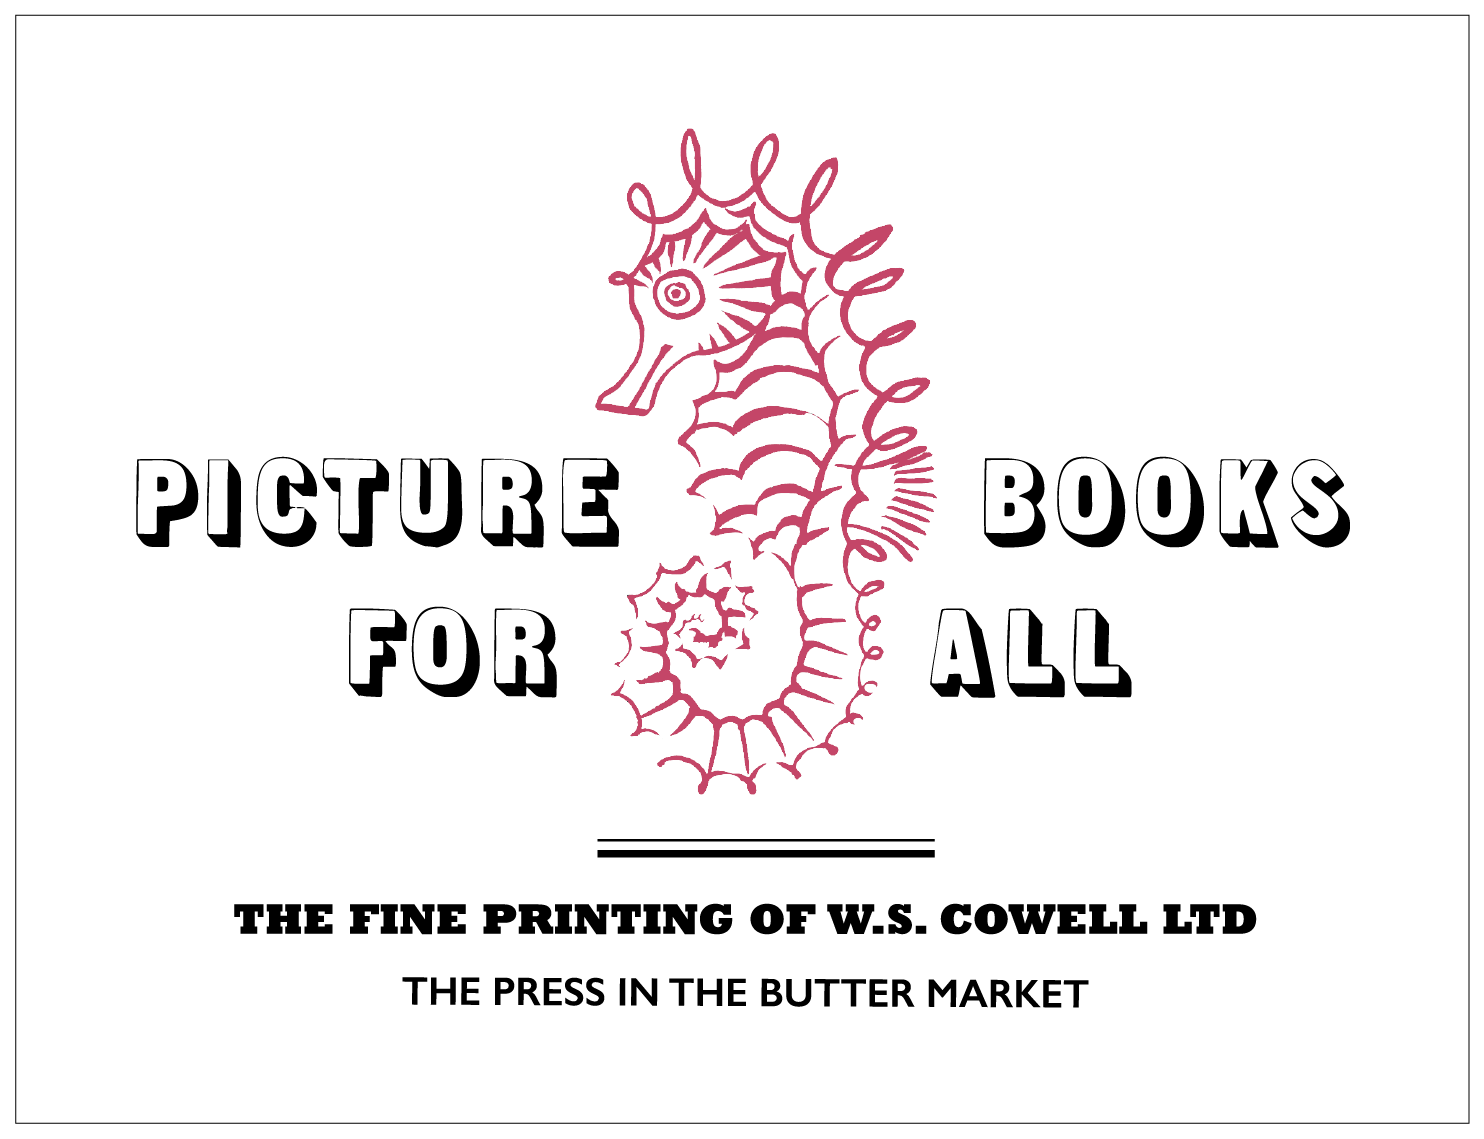 Picture Books for All: The Fine Printing of W.S. Cowell Ltd, The Press in the Butter Market